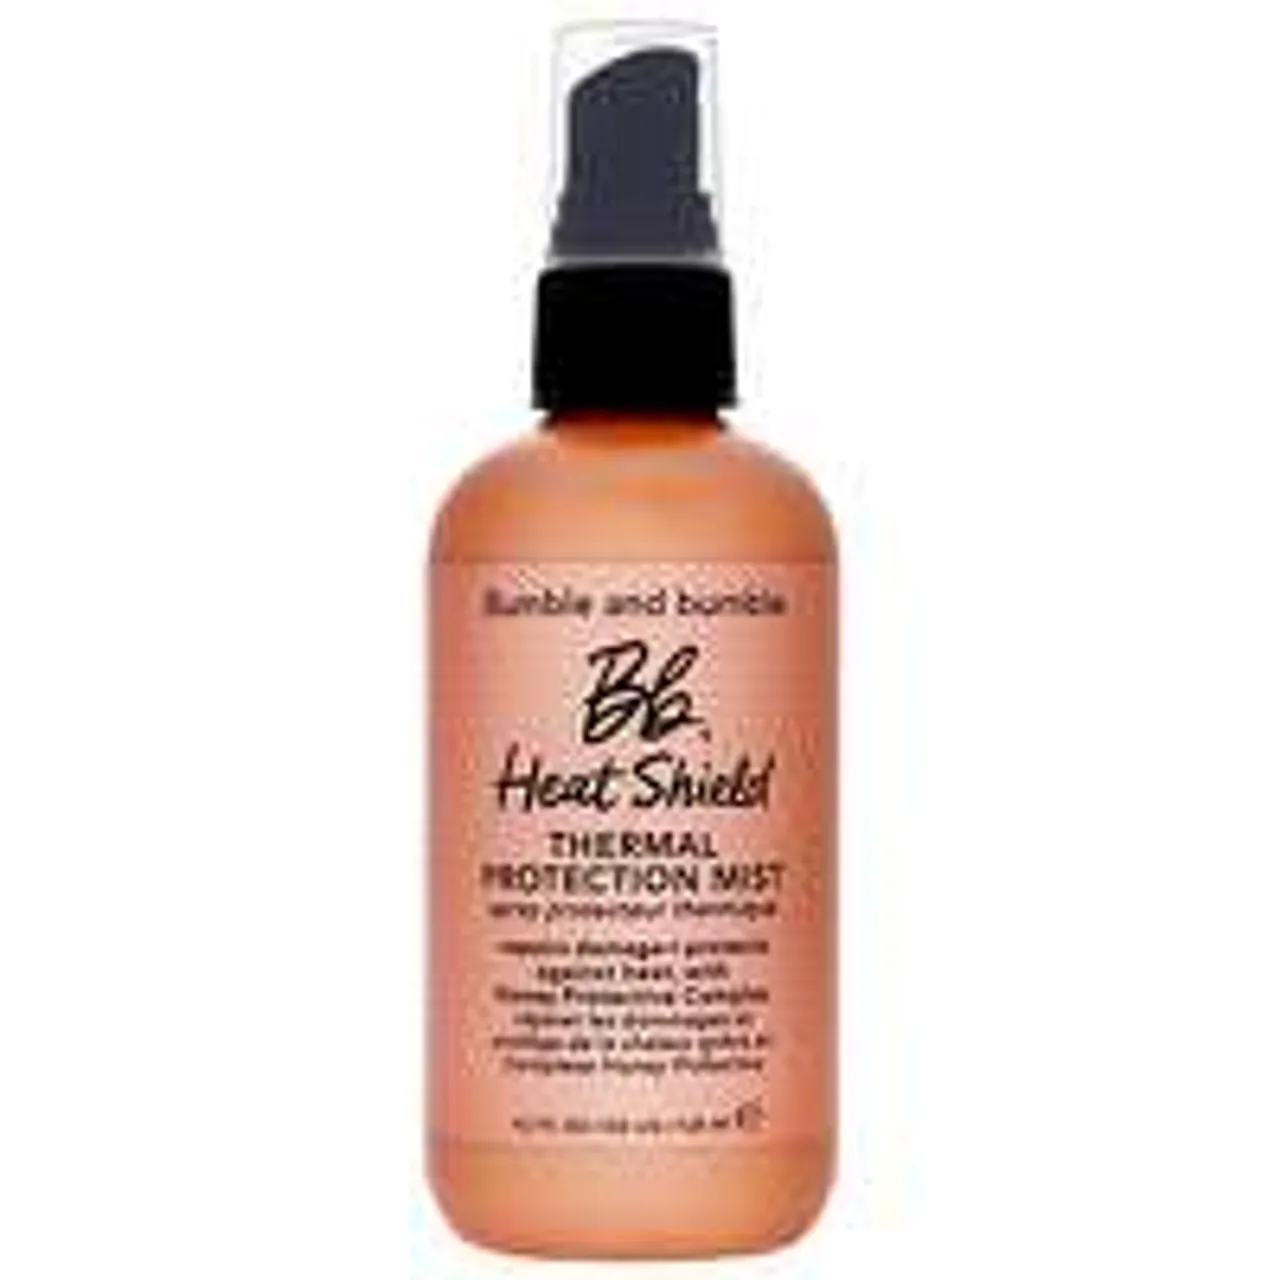 Bumble and bumble Bb. Heat Shield Thermal Protection Mist 125ml